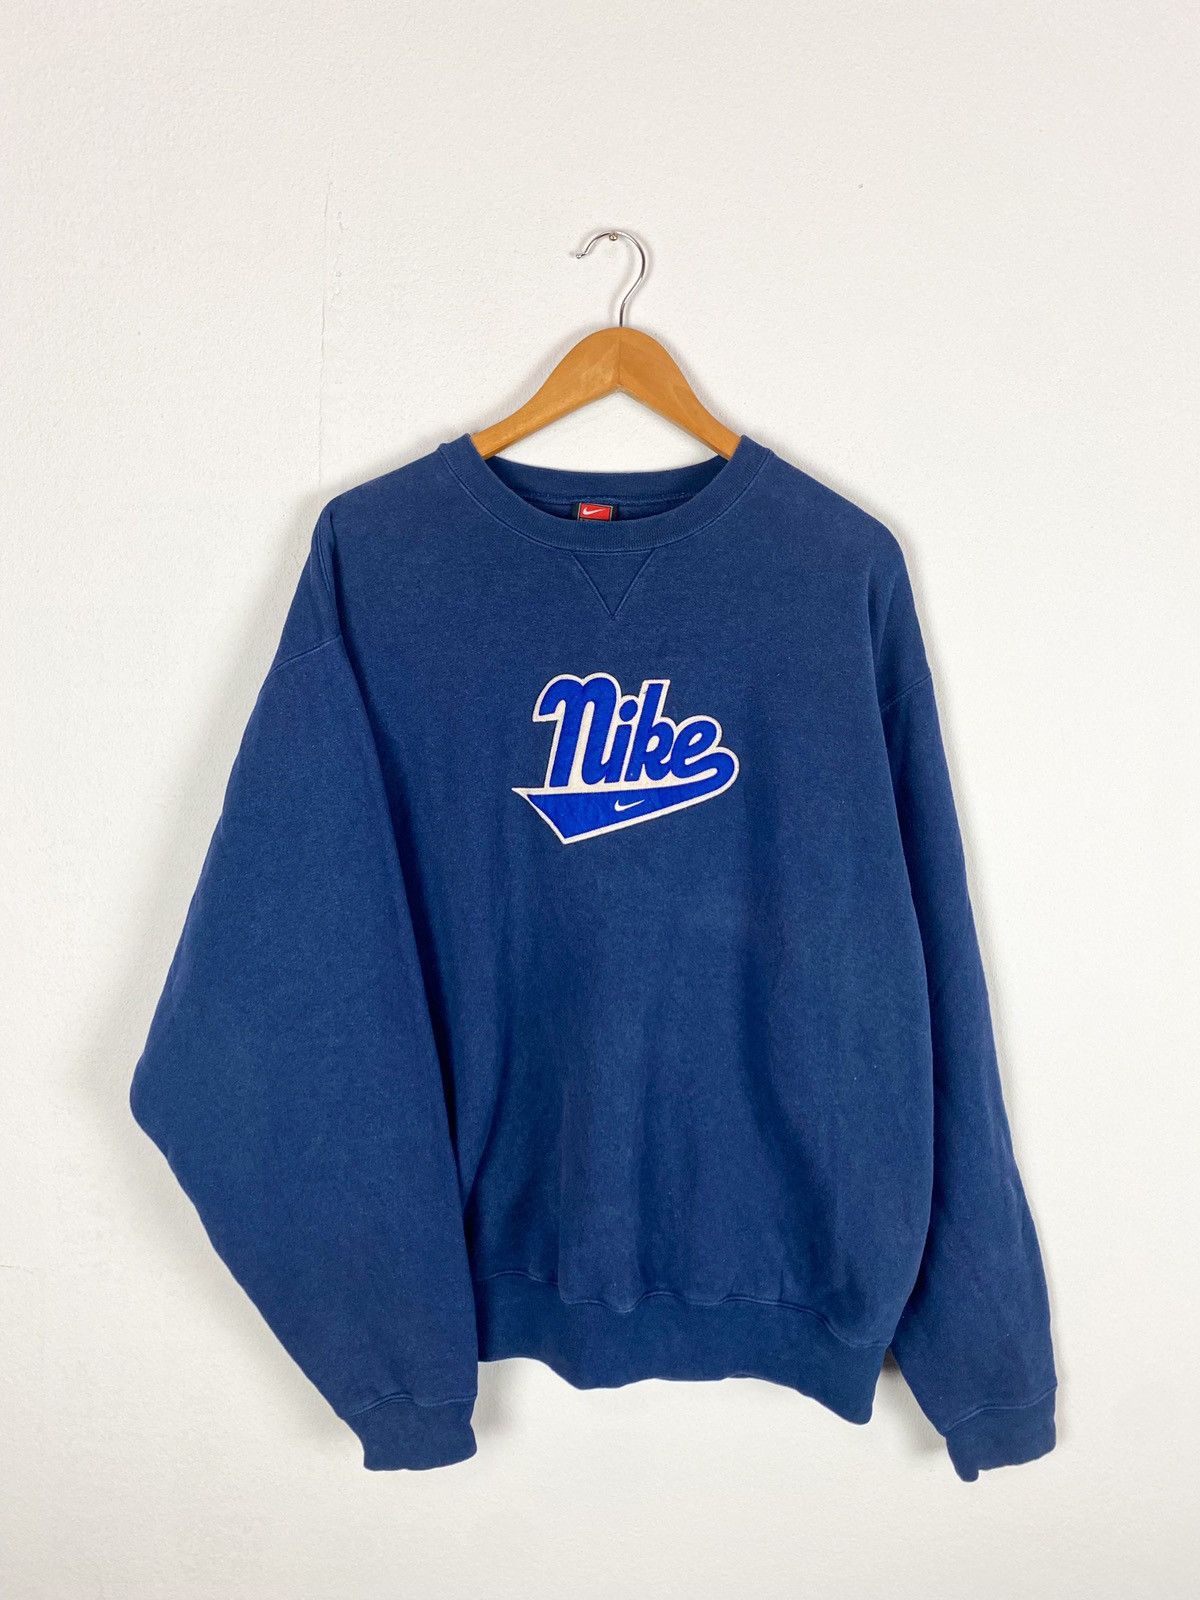 Nike Vintage Nike Spell Out Sweatshirt Size US L / EU 52-54 / 3 - 1 Preview